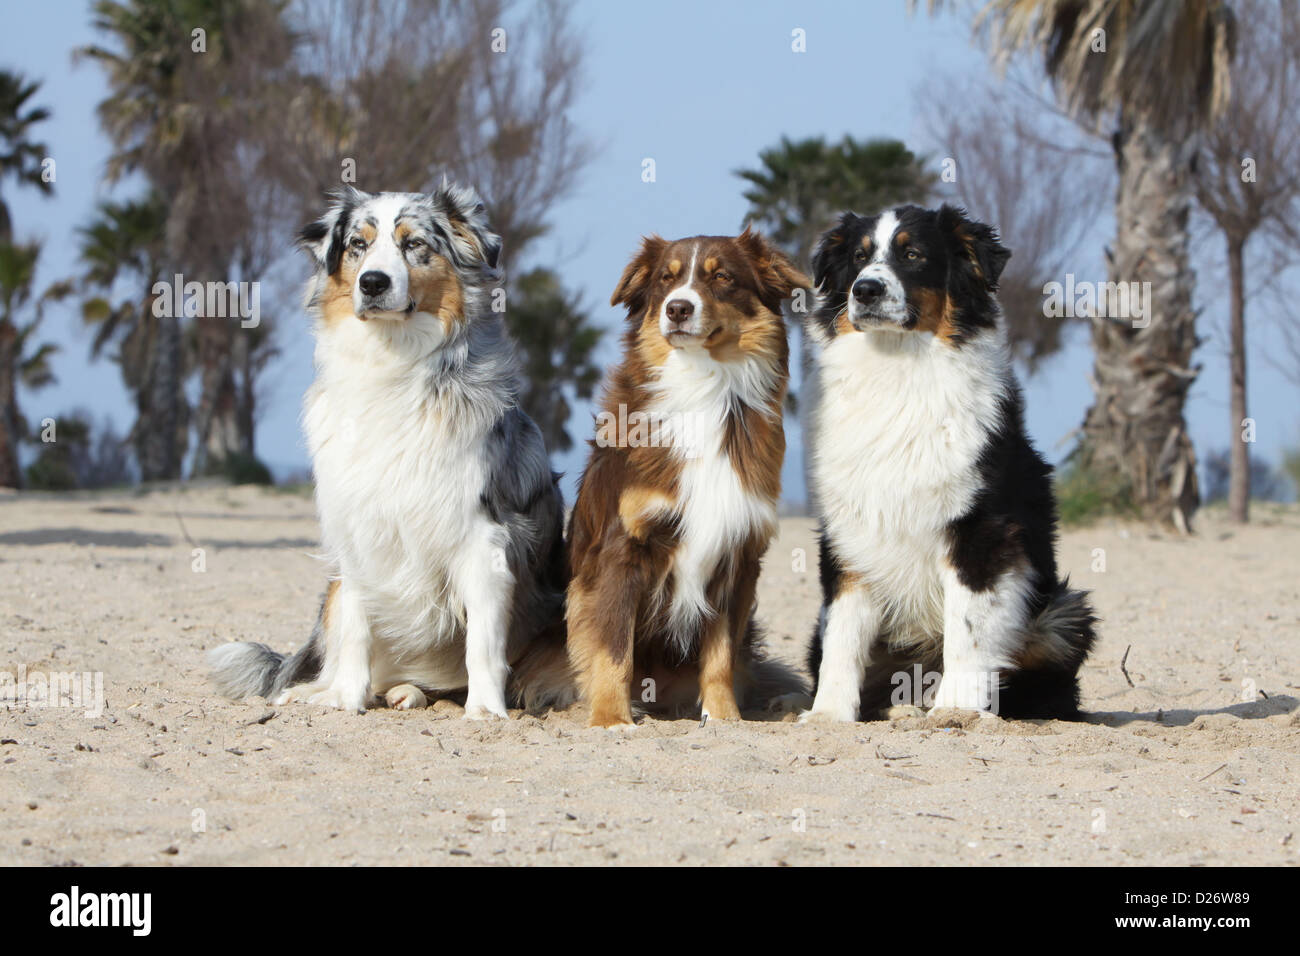 Dog Australian shepherd / Aussie three adults sitting (blue Merle, red tricolor, black tricolor) on the beach Stock Photo